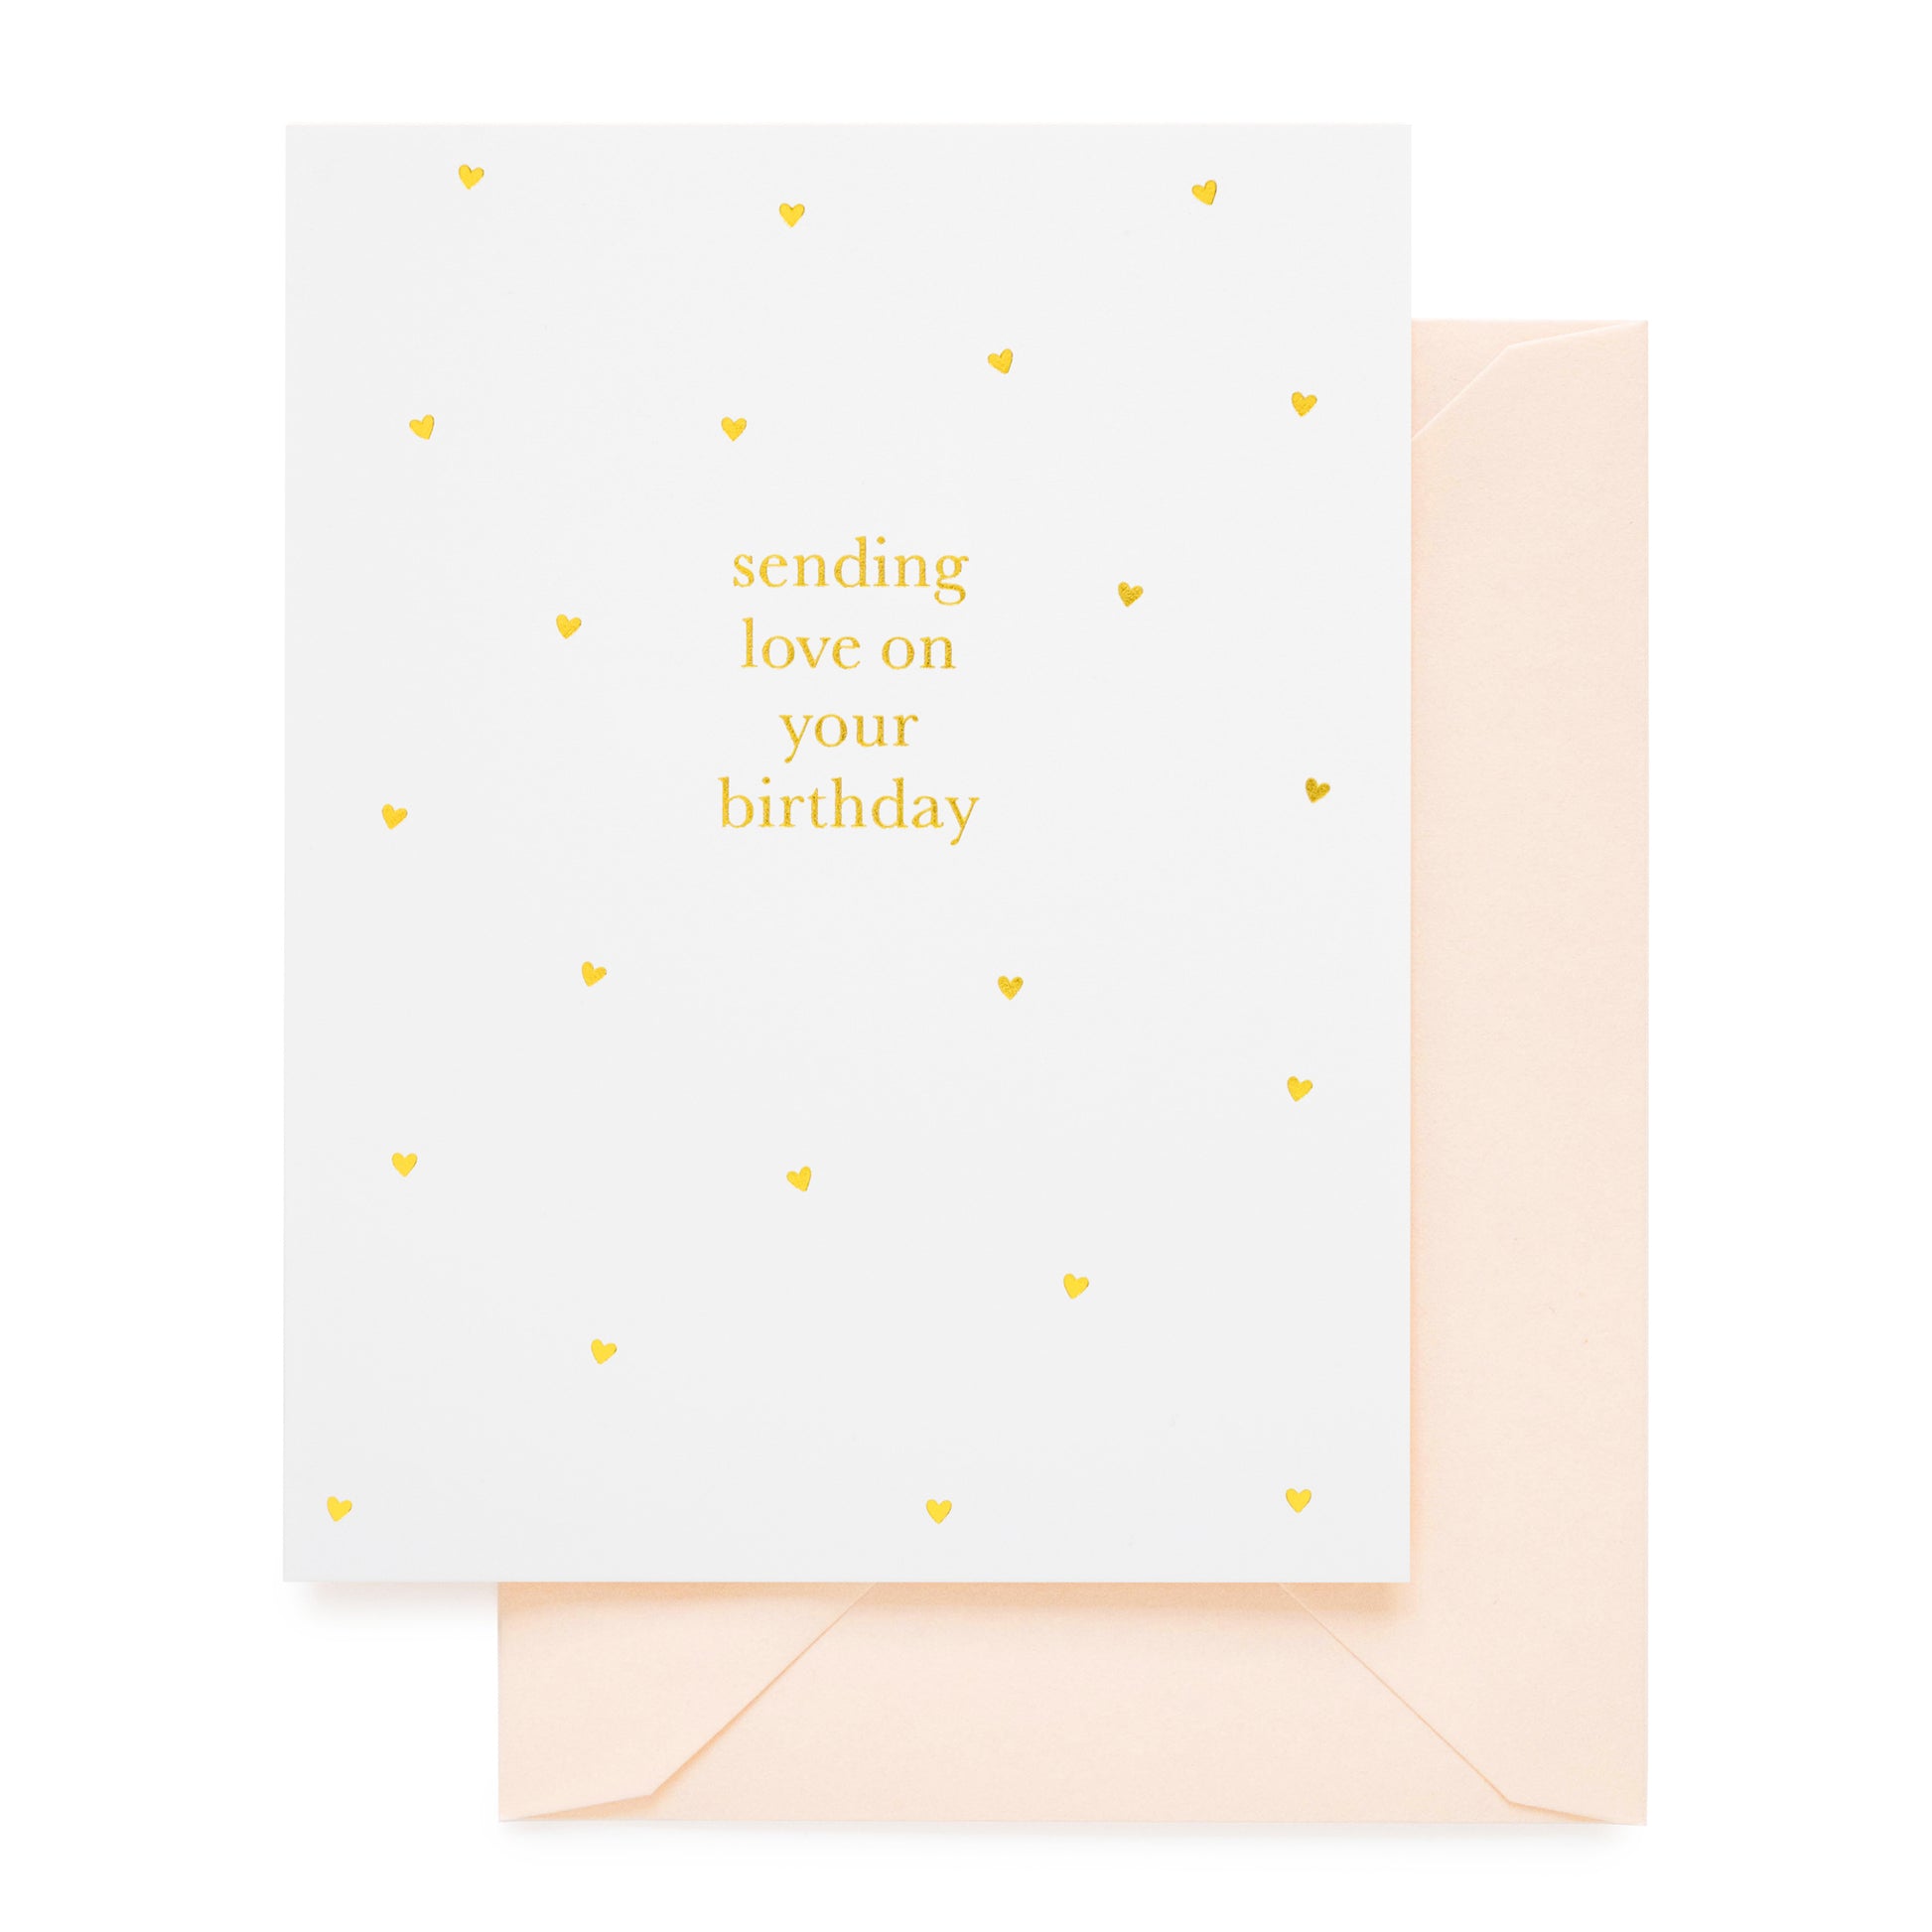 Sending love on your birthday with gold foil hearts